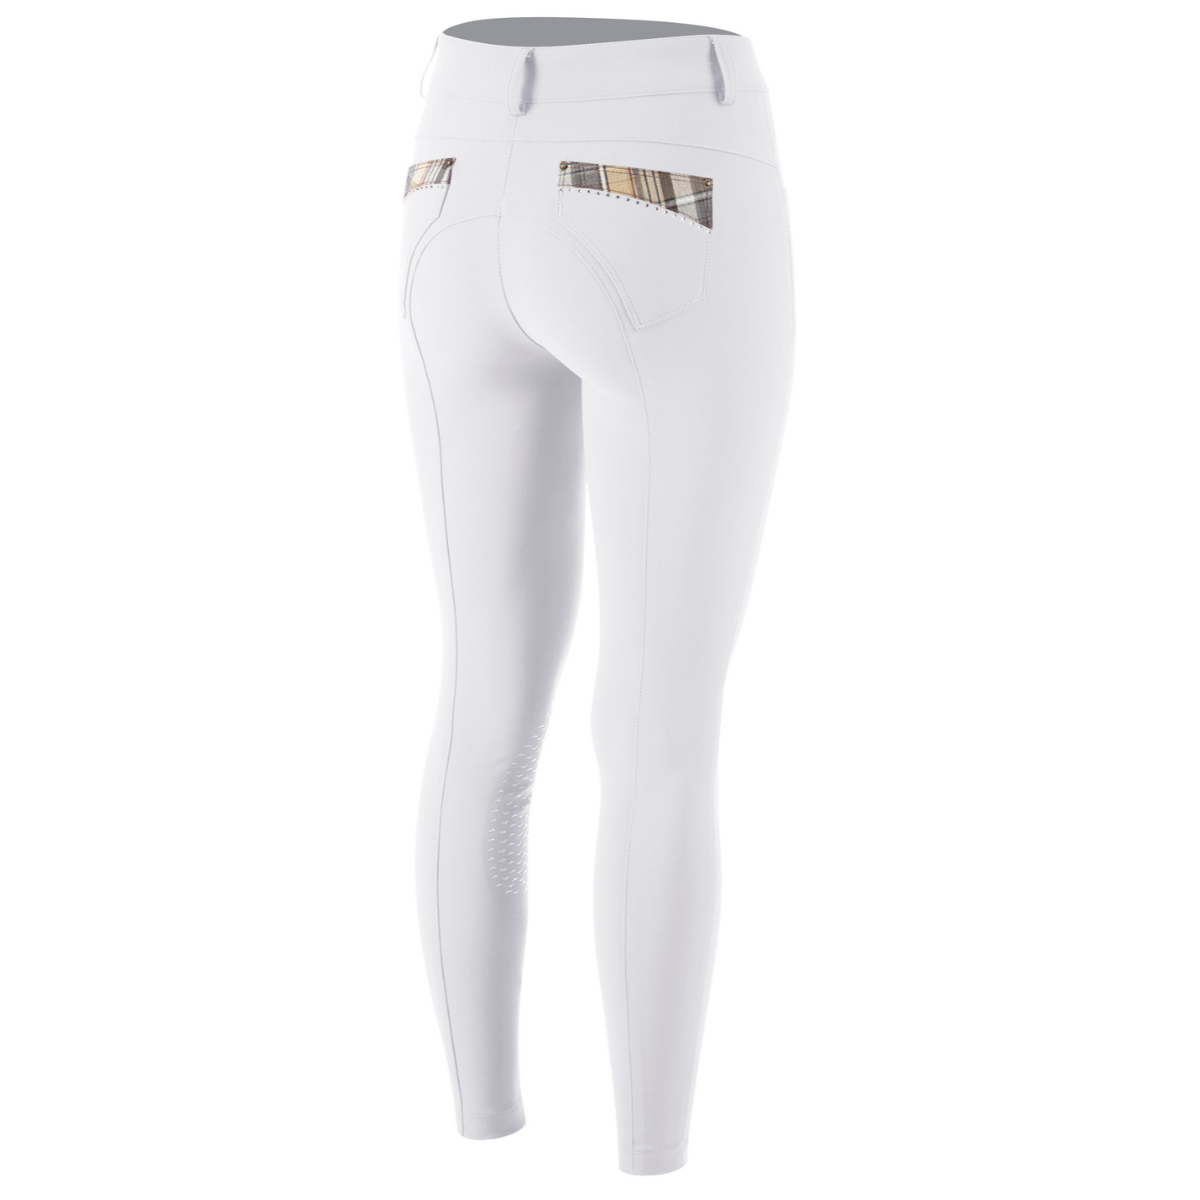 Animo 'Nonce' Breeches in Bianco